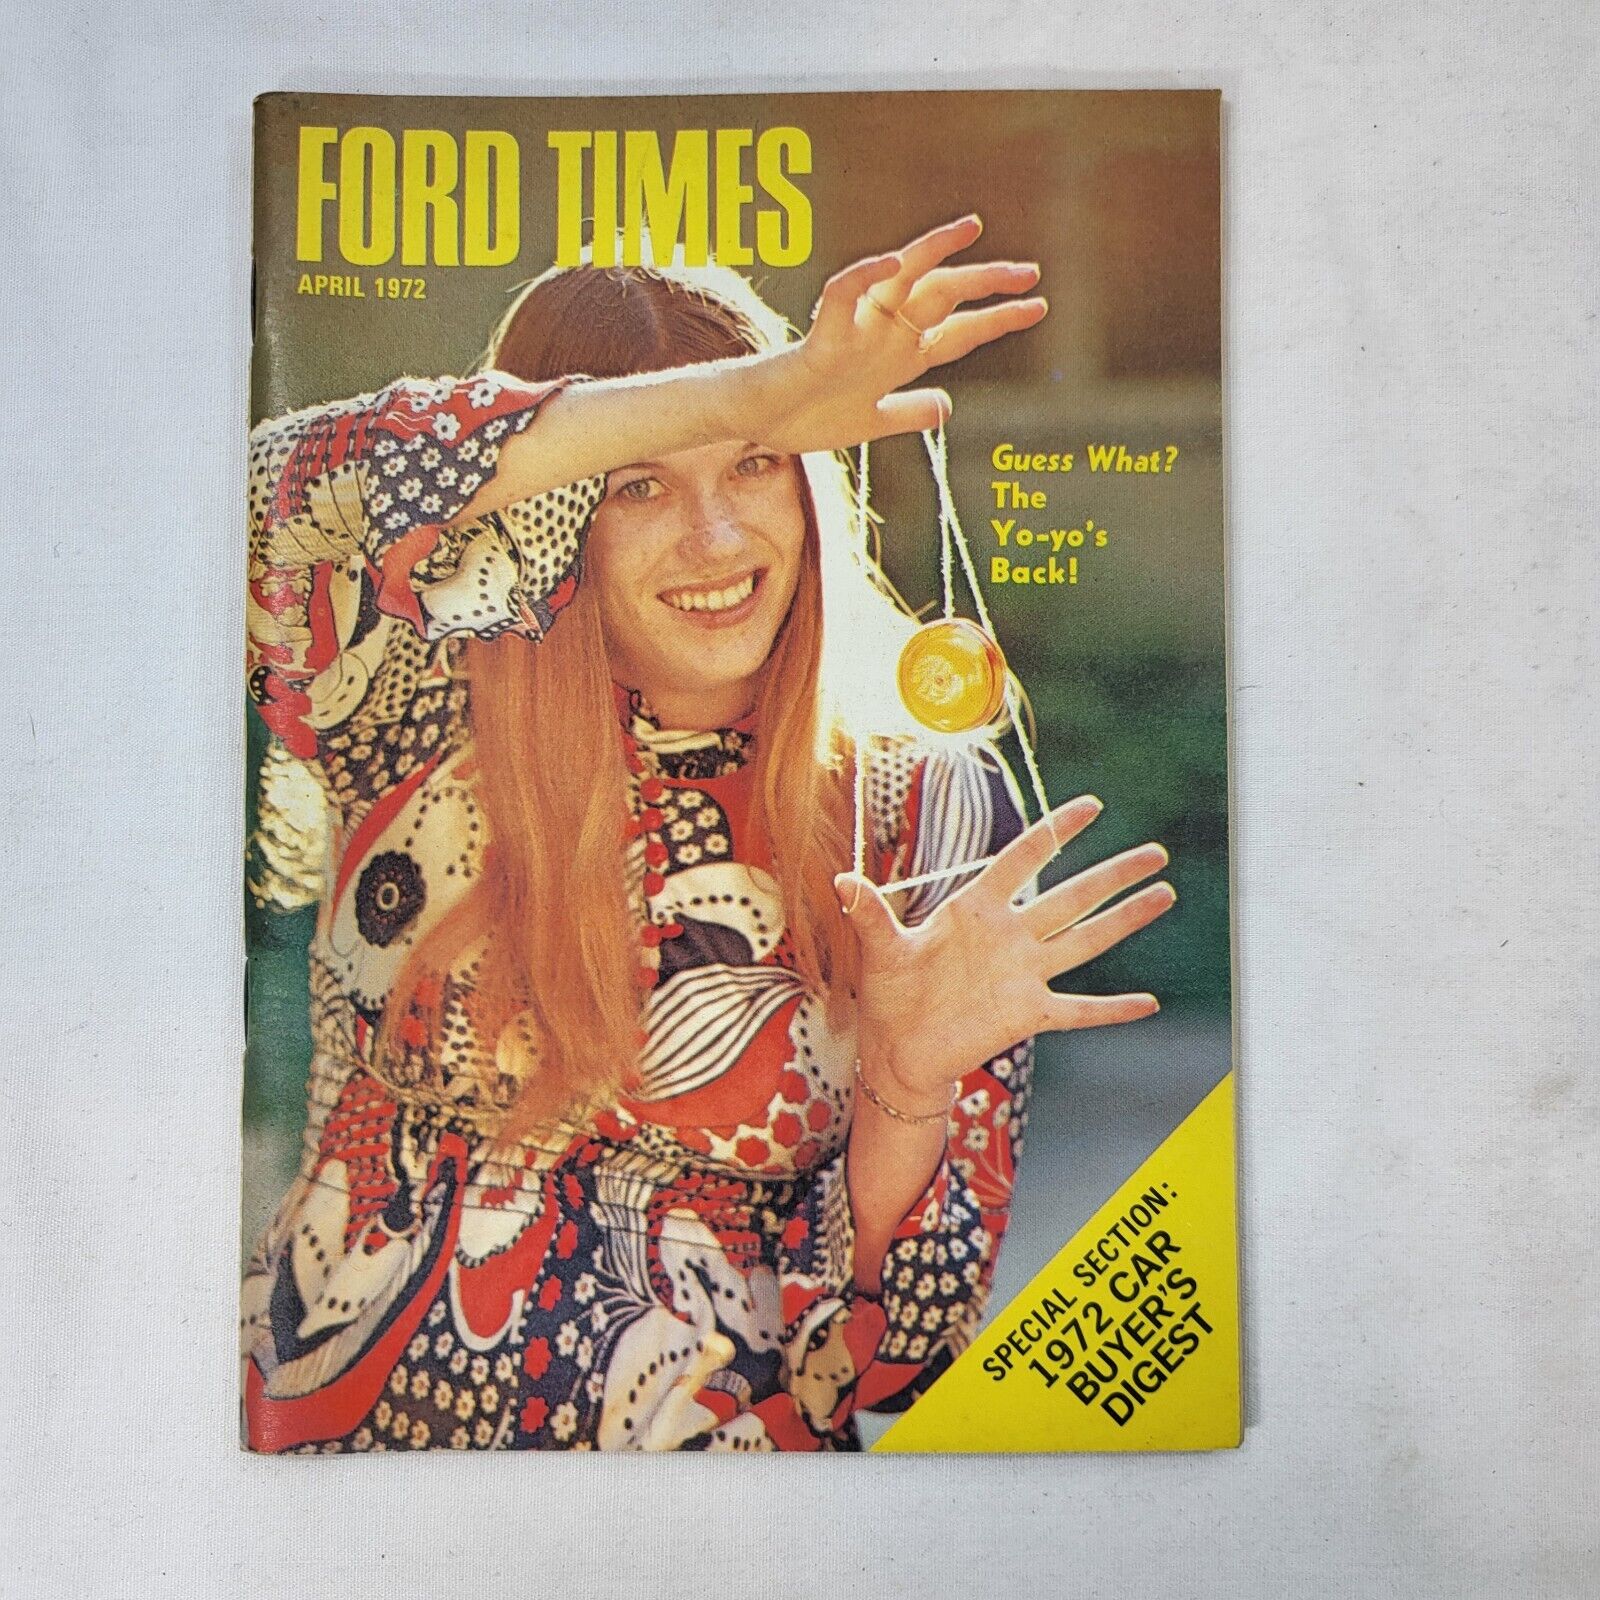 Ford Times Magazine - April 1972 Issue - Ford Motor Company